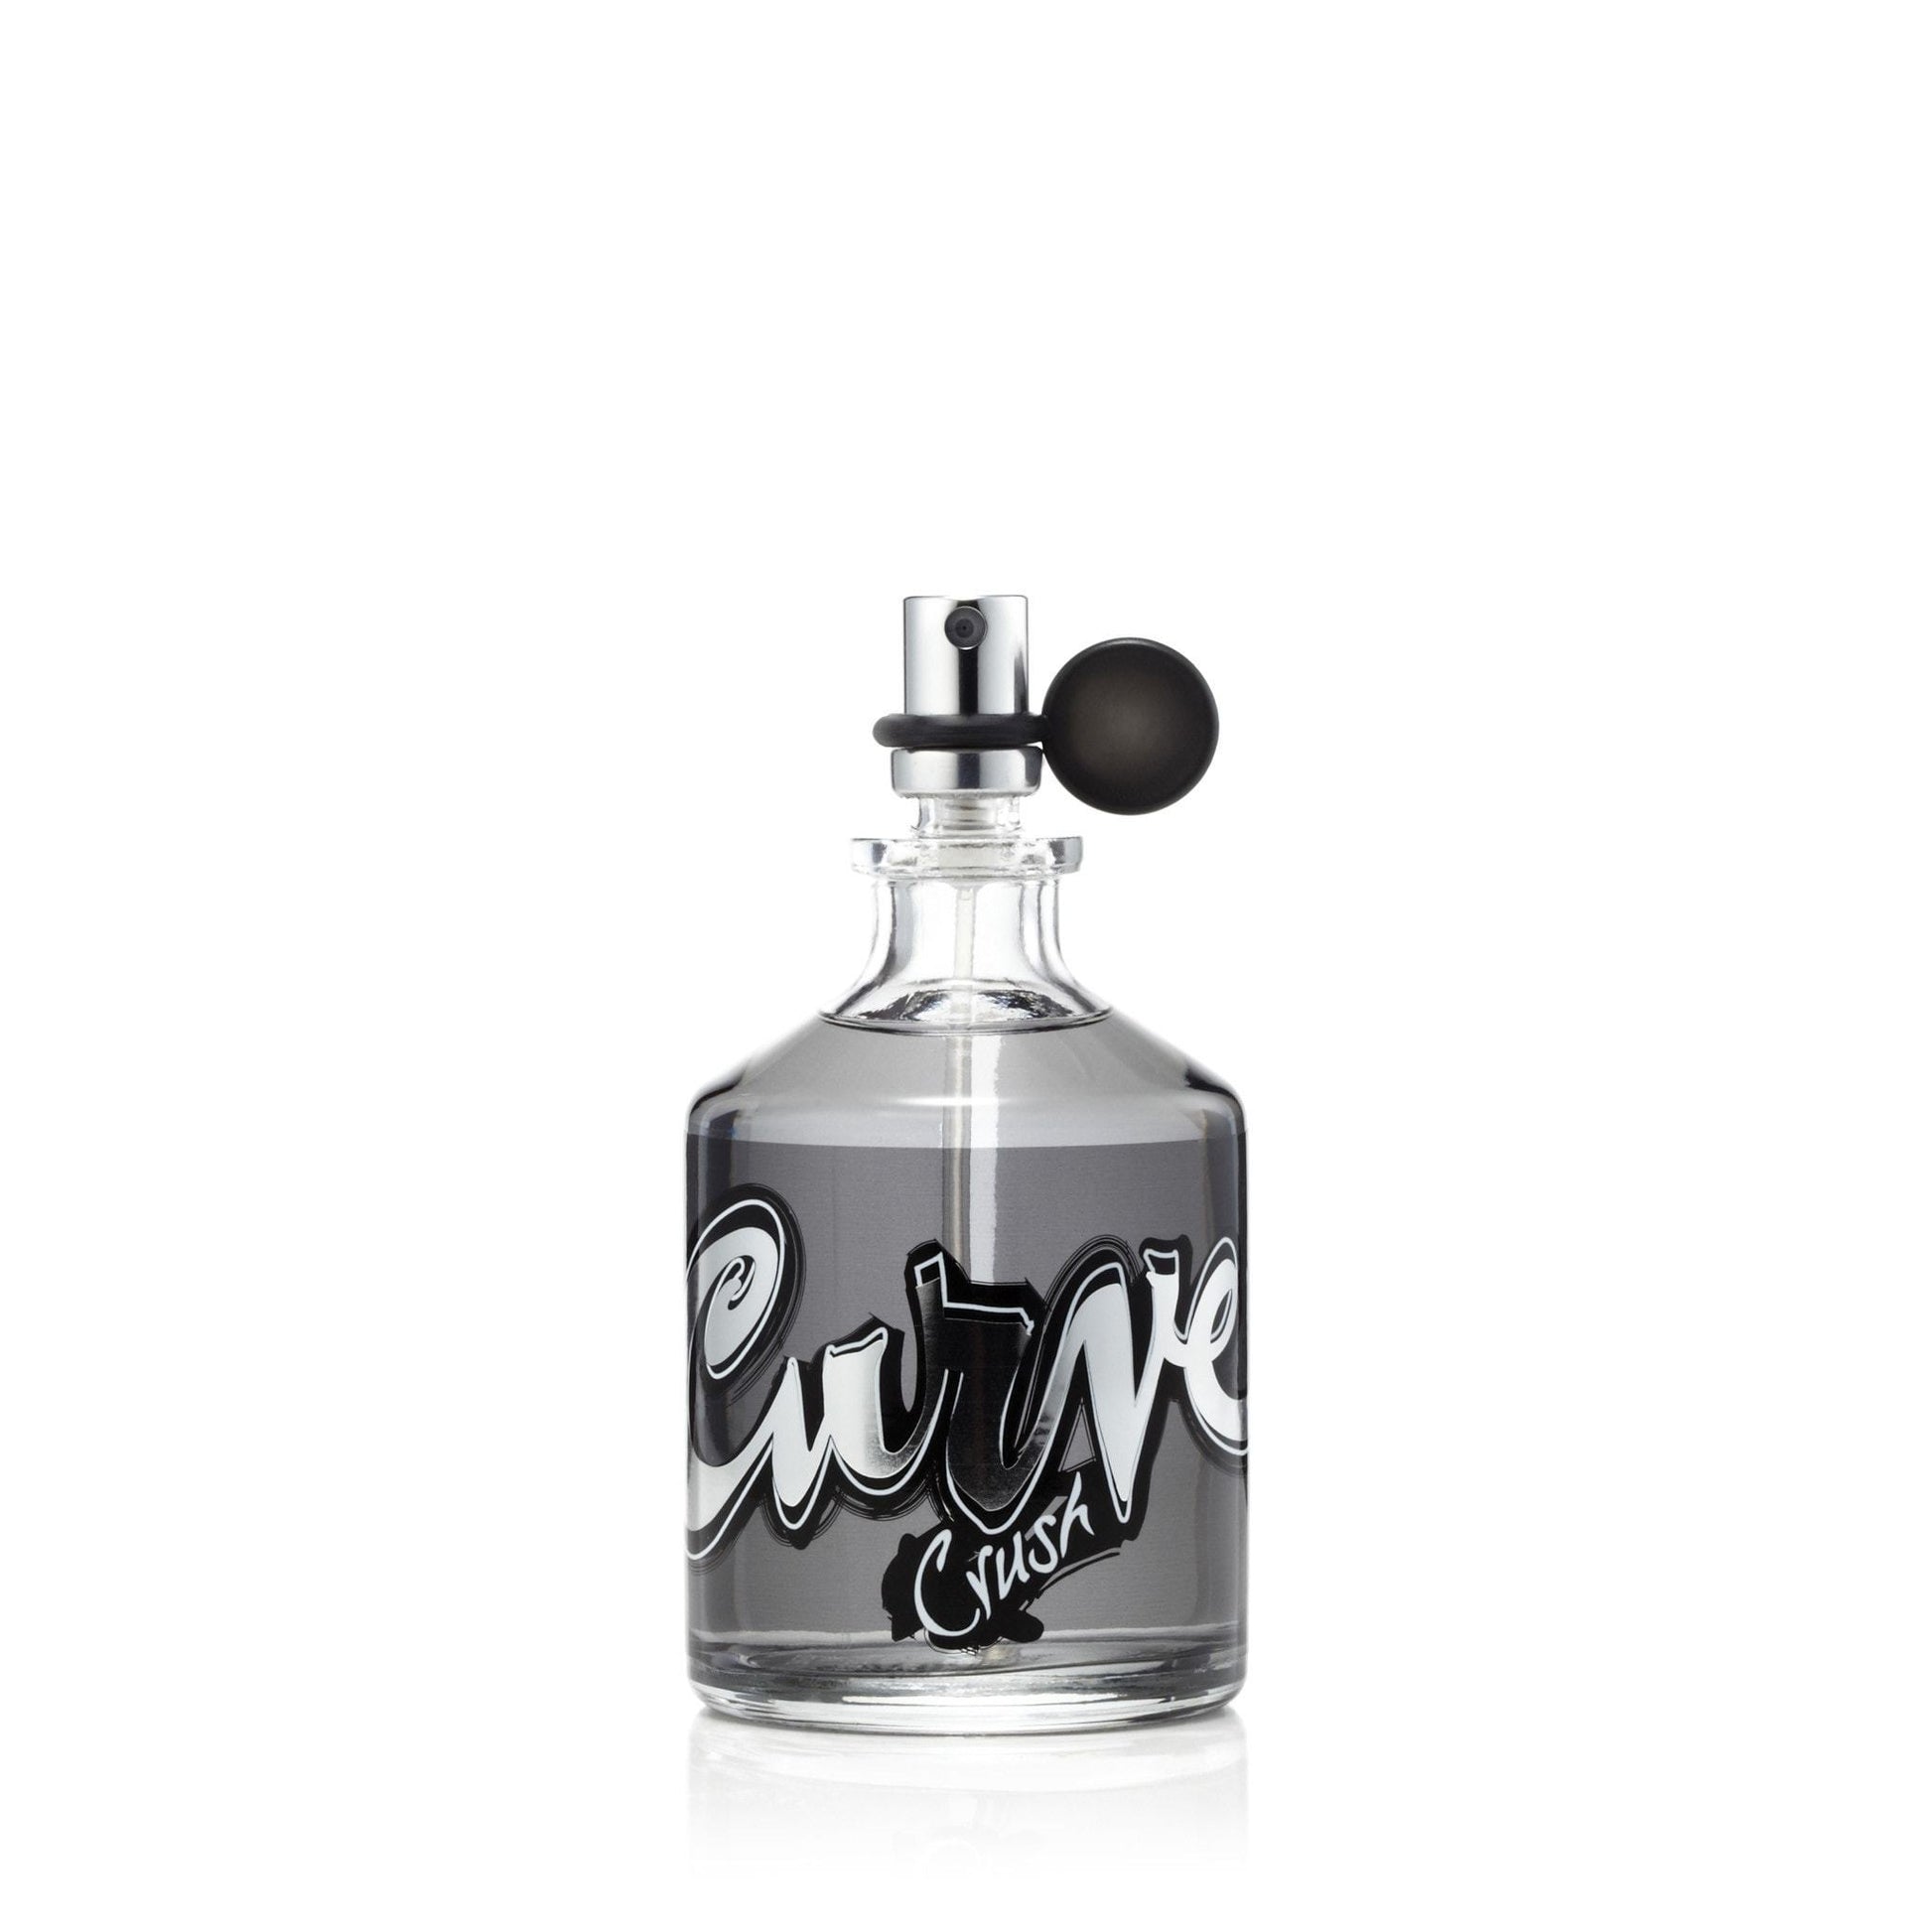 Curve Crush Cologne Spray for Men by Claiborne, Product image 1